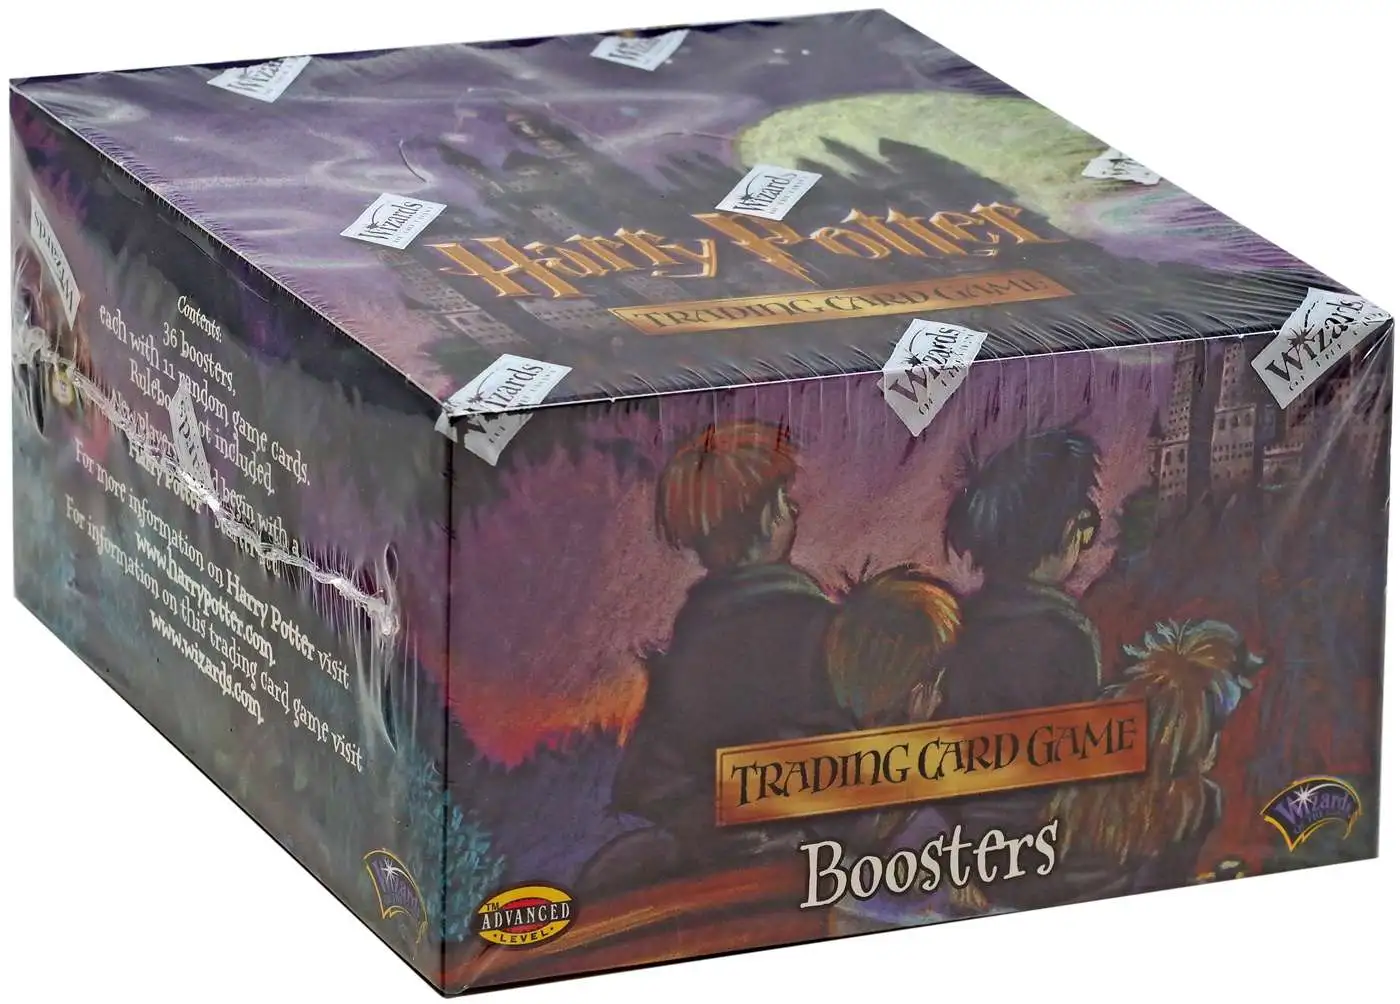 HARRY POTTER Quidditch Cup Trading Card Game 36 Pack Box 396 Total TCG Cards!